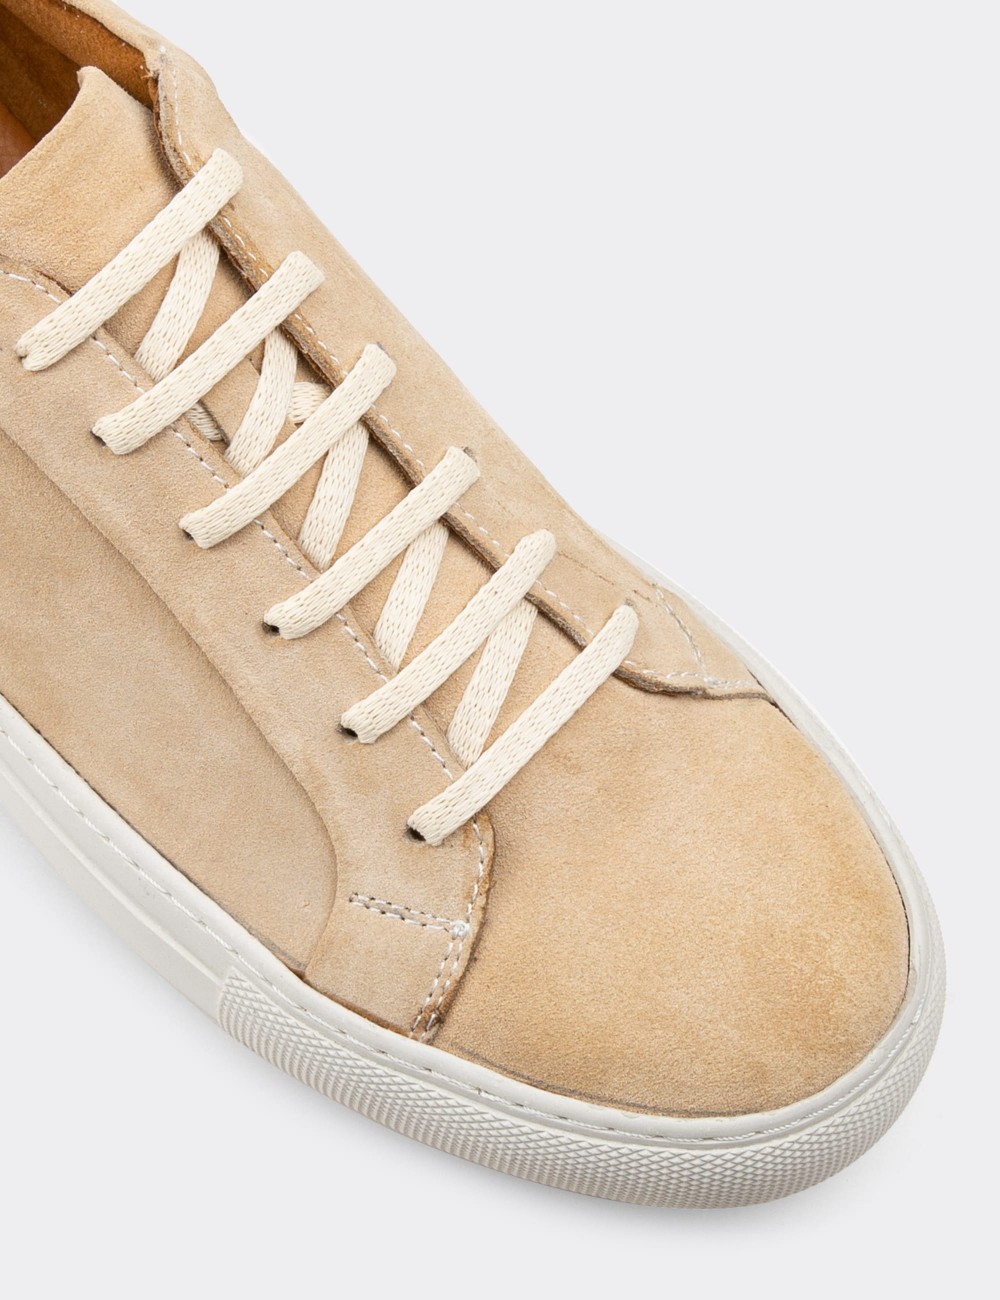 Beige Suede Leather Sneakers - 01829MBEJC03